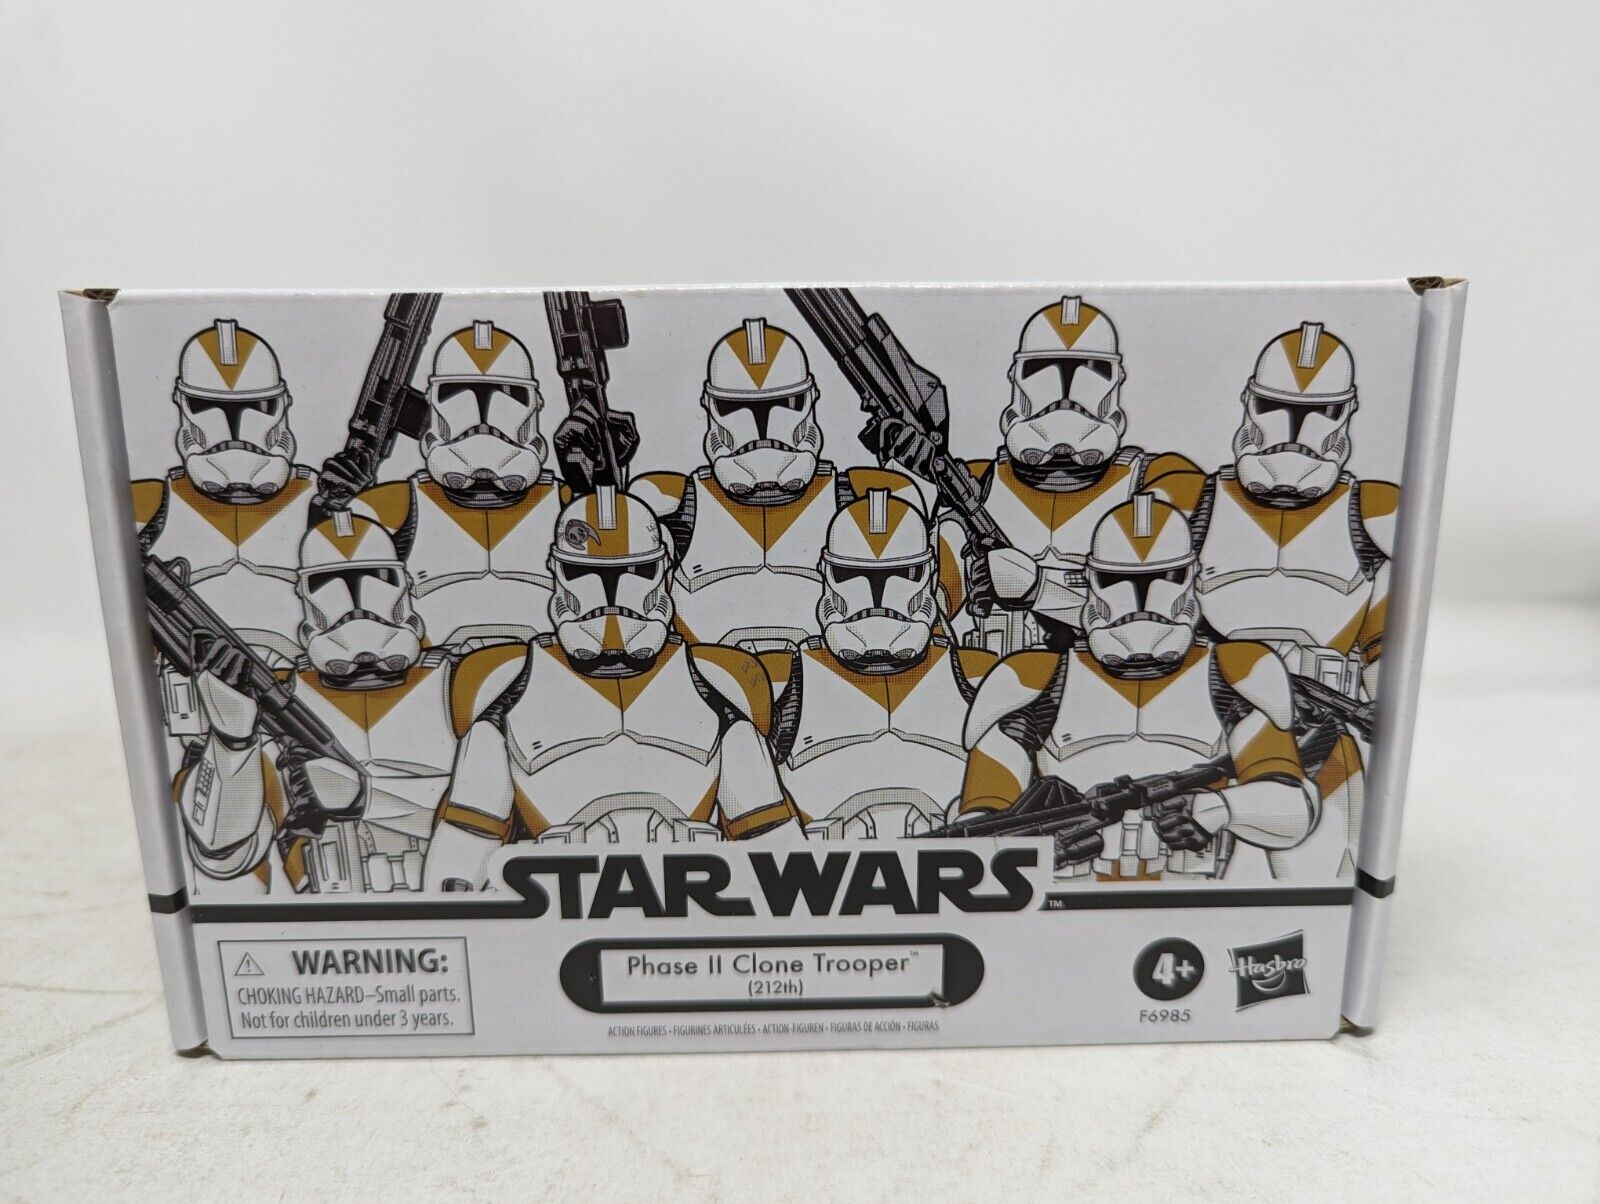 Star Wars Vintage Collection 4-Pack Phase 2 Clone Trooper (212th) Hasbro 